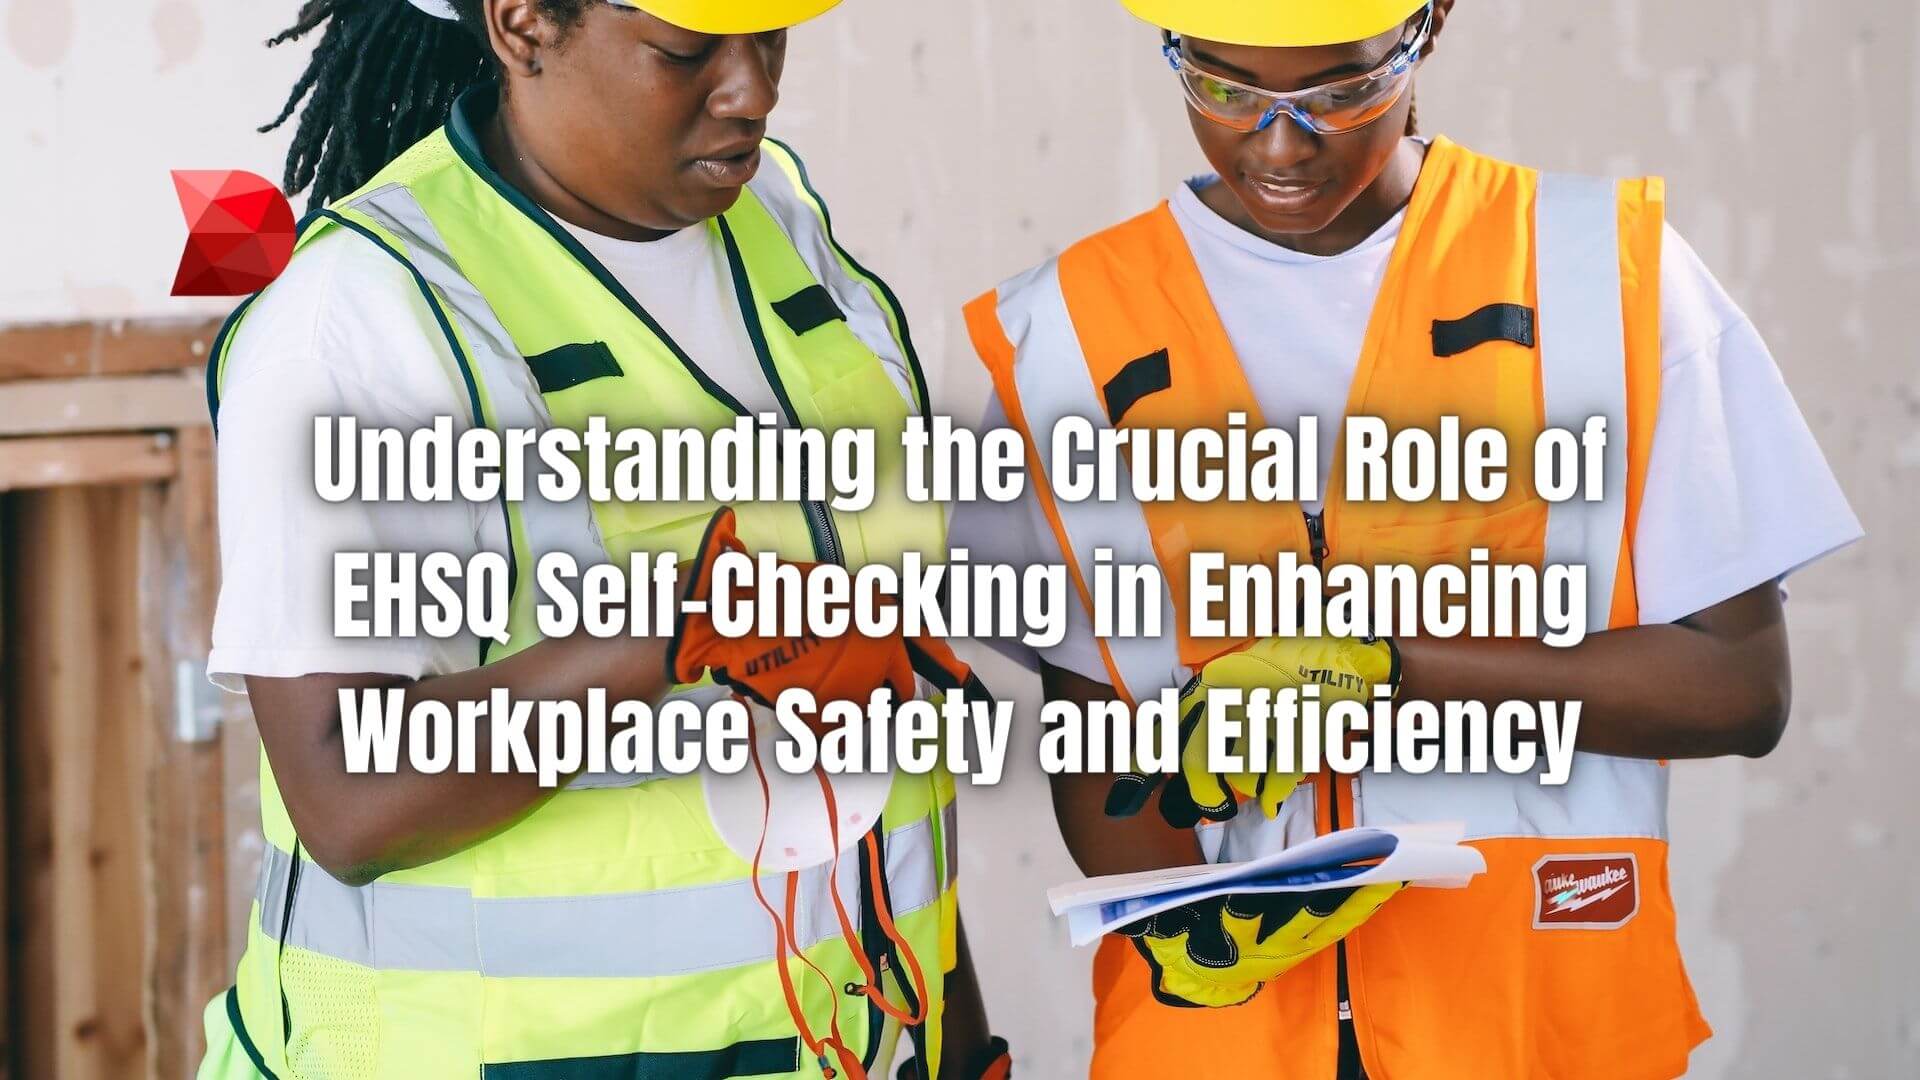 Adopting EHSQ self-checking strategies can transform how organizations handle compliance, safety, and quality control. Learn more!